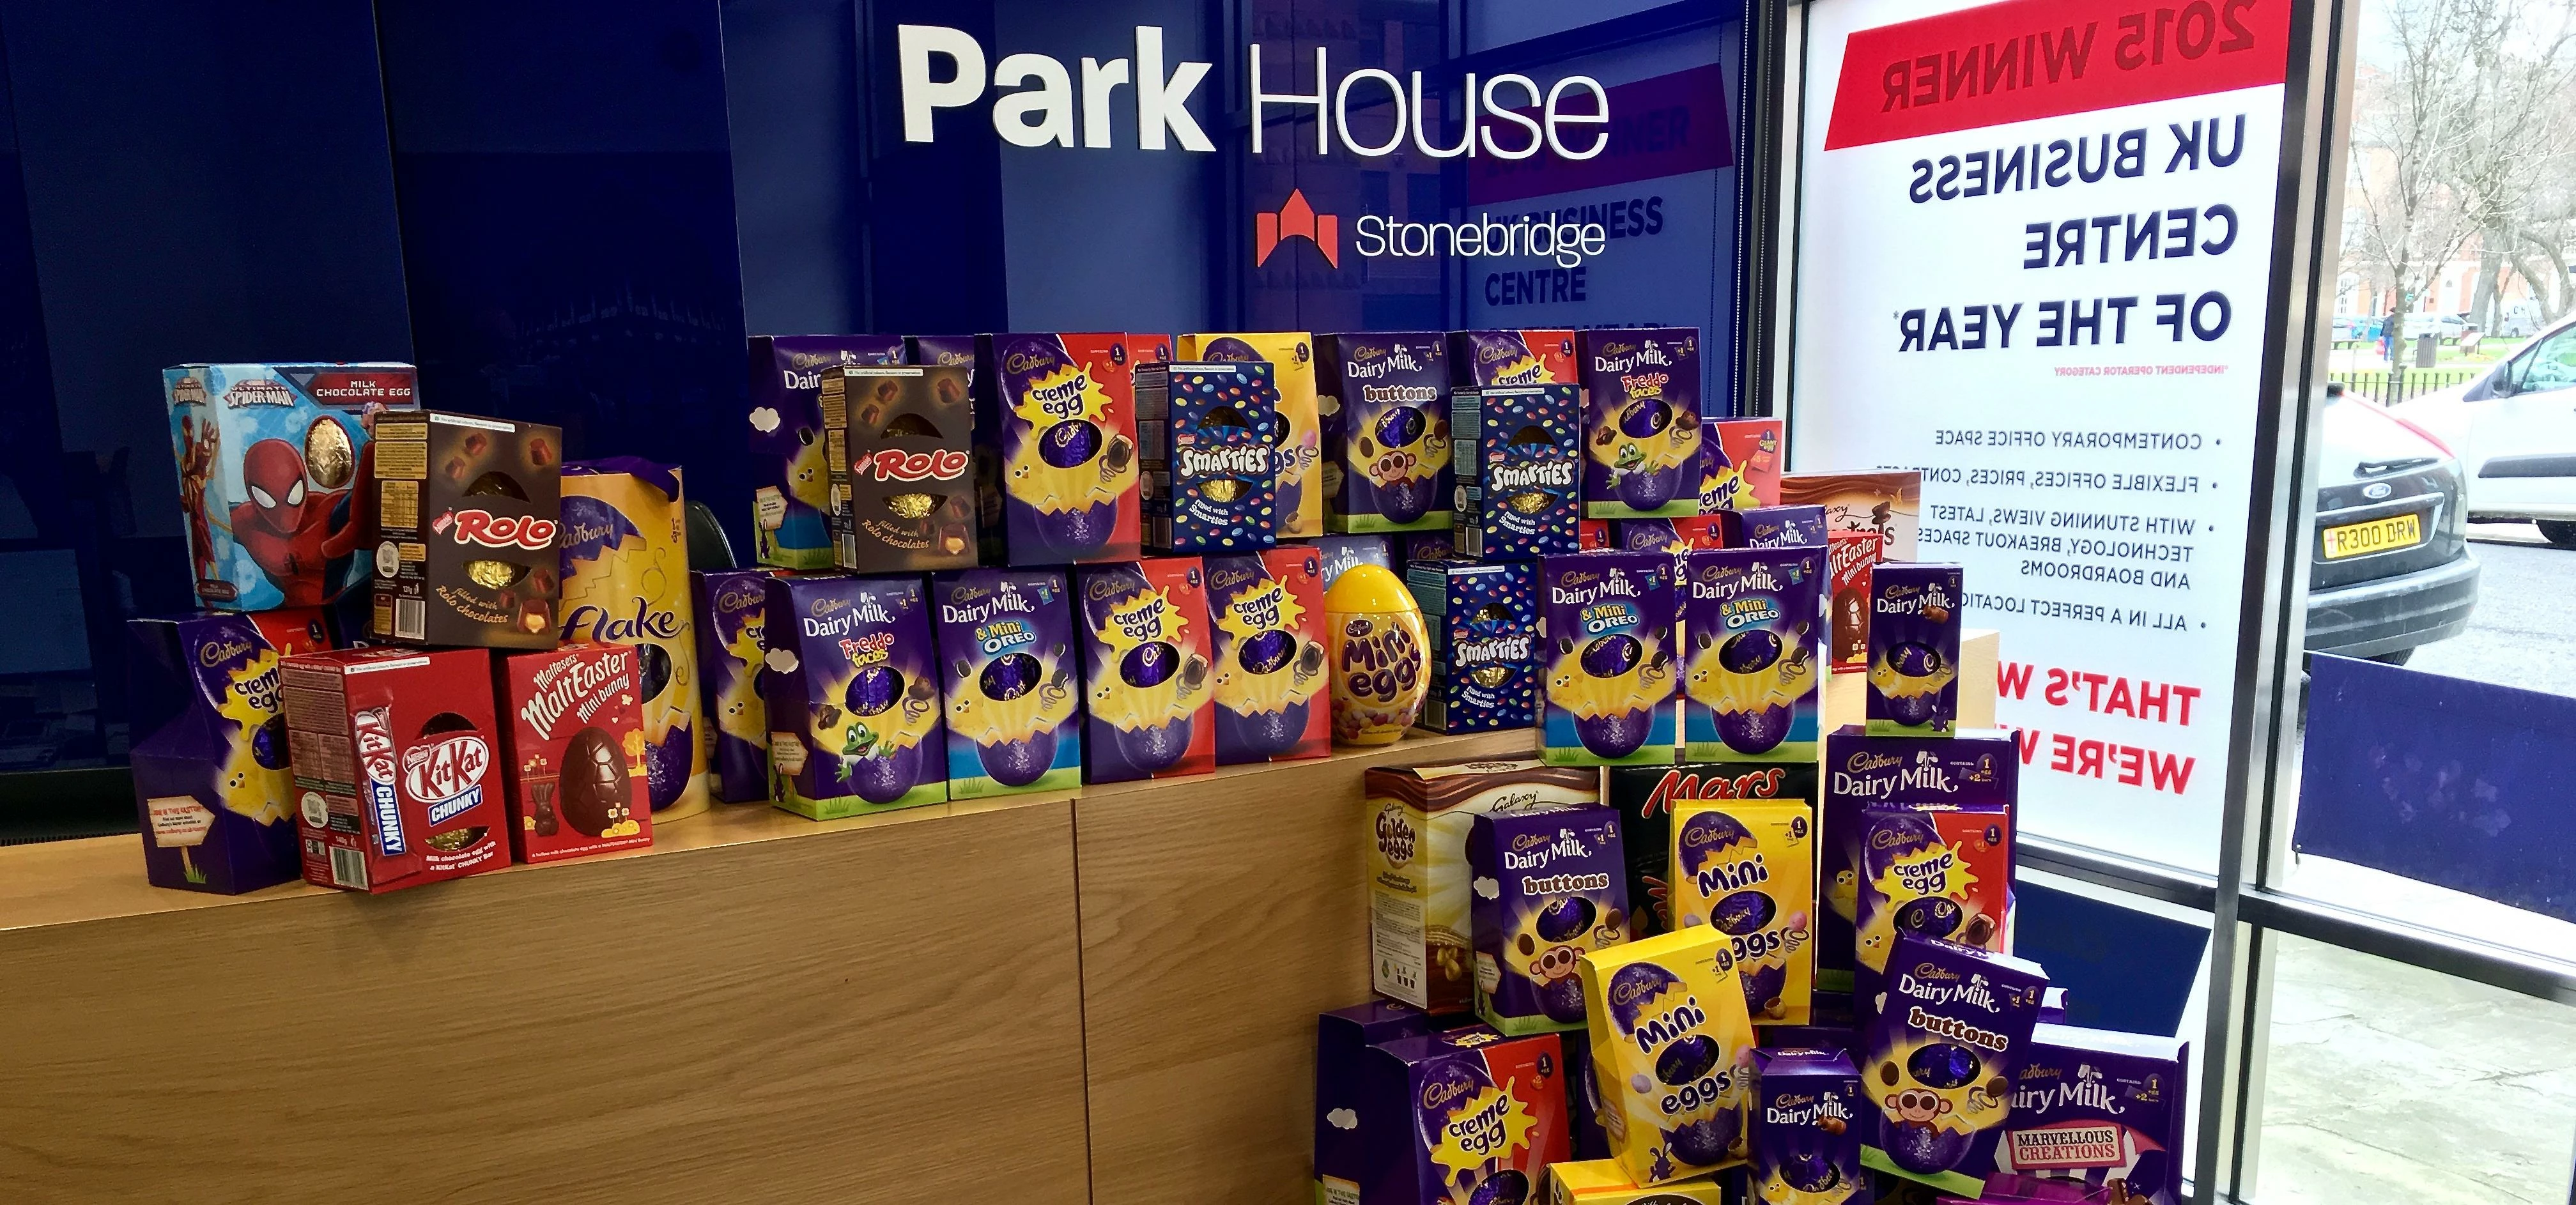 Over 80 Easter eggs have been donated to Leeds Children's Charity by businesses at Stonebridge Offic